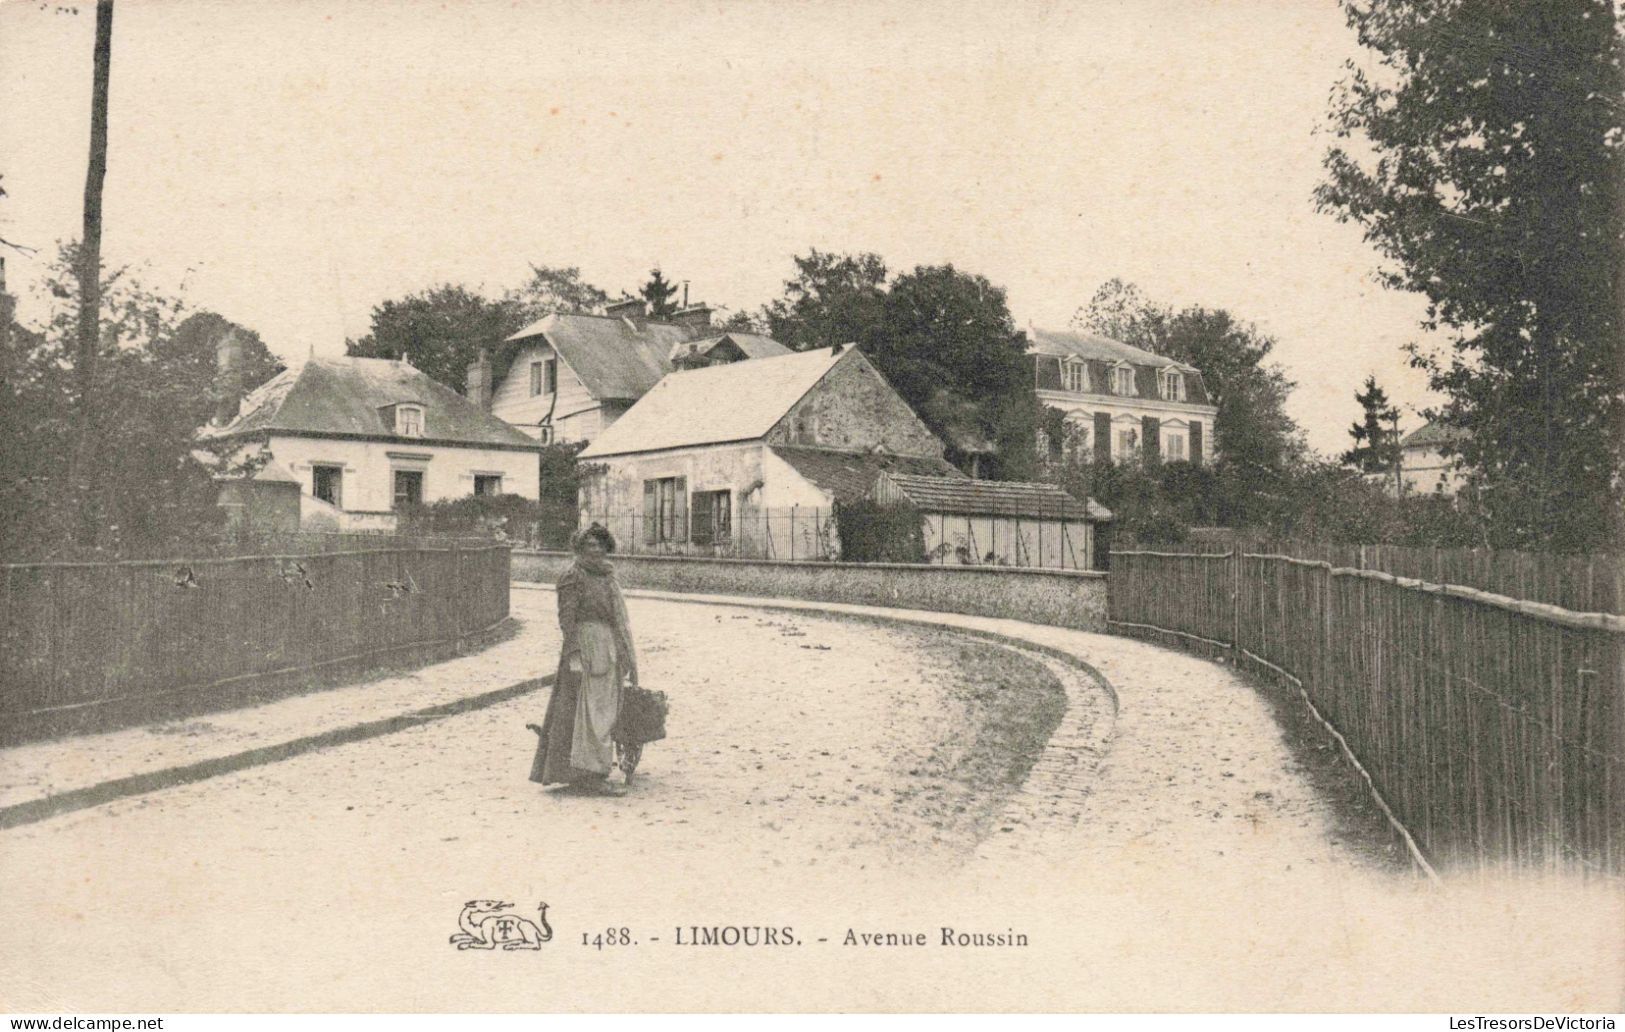 FRANCE - Limours - Avenue Roussin - Carte Postale Ancienne - Limours